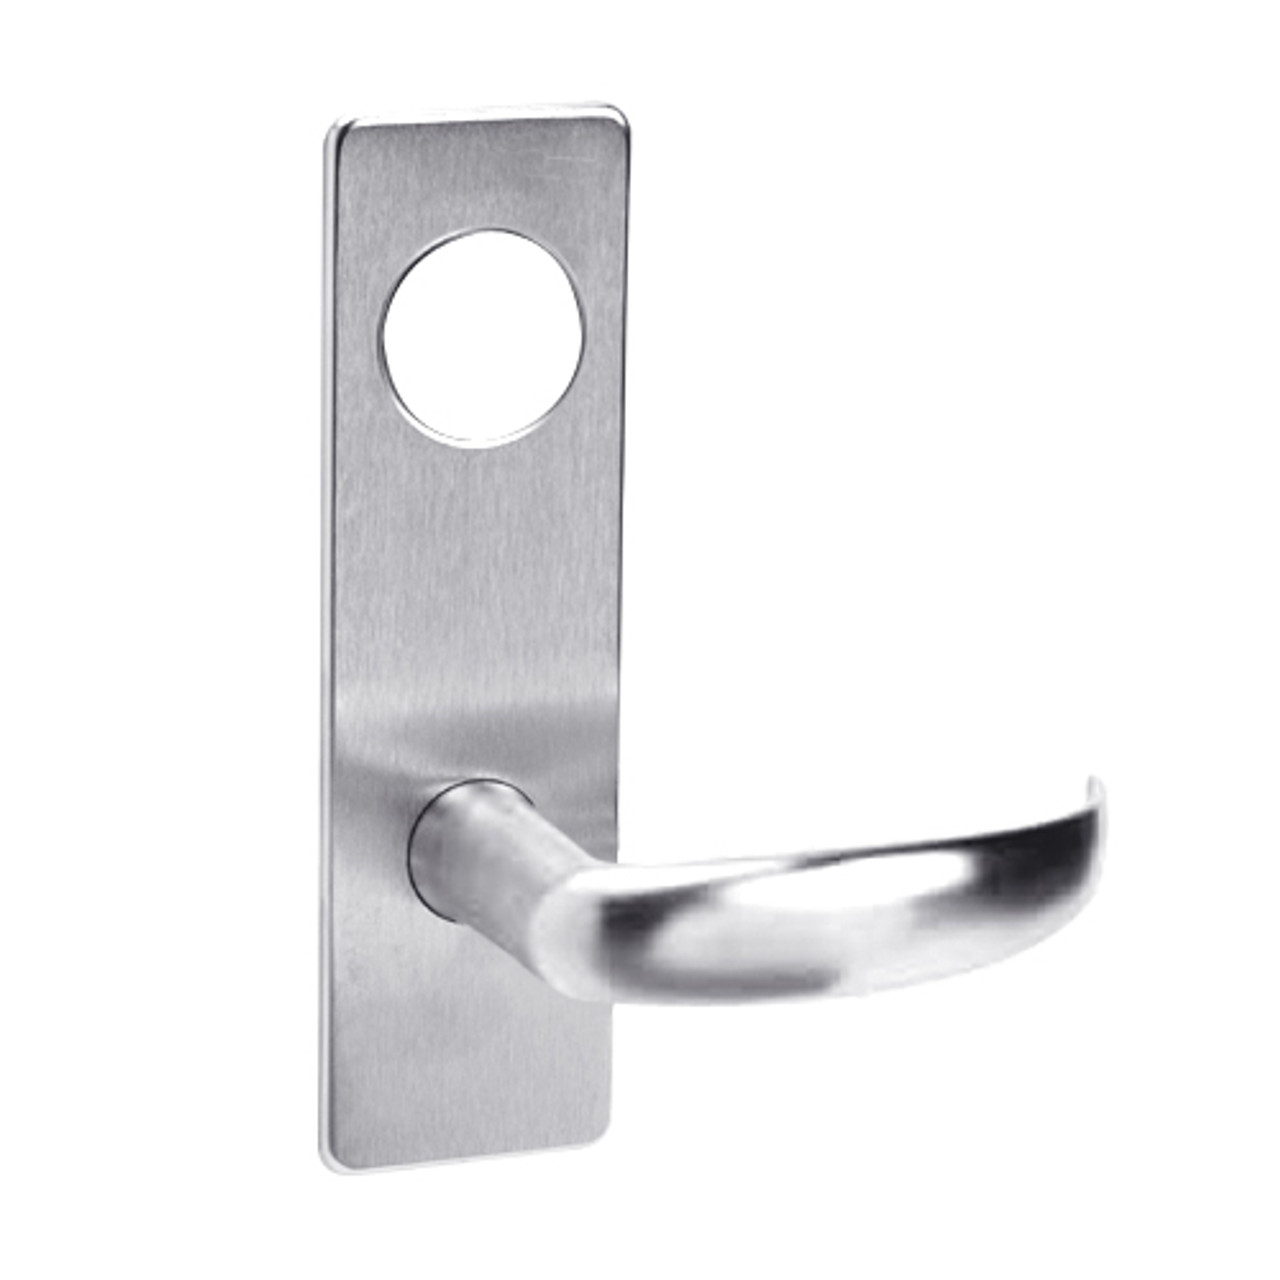 ML2042-PSN-629-LC Corbin Russwin ML2000 Series Mortise Entrance Locksets with Princeton Lever in Bright Stainless Steel